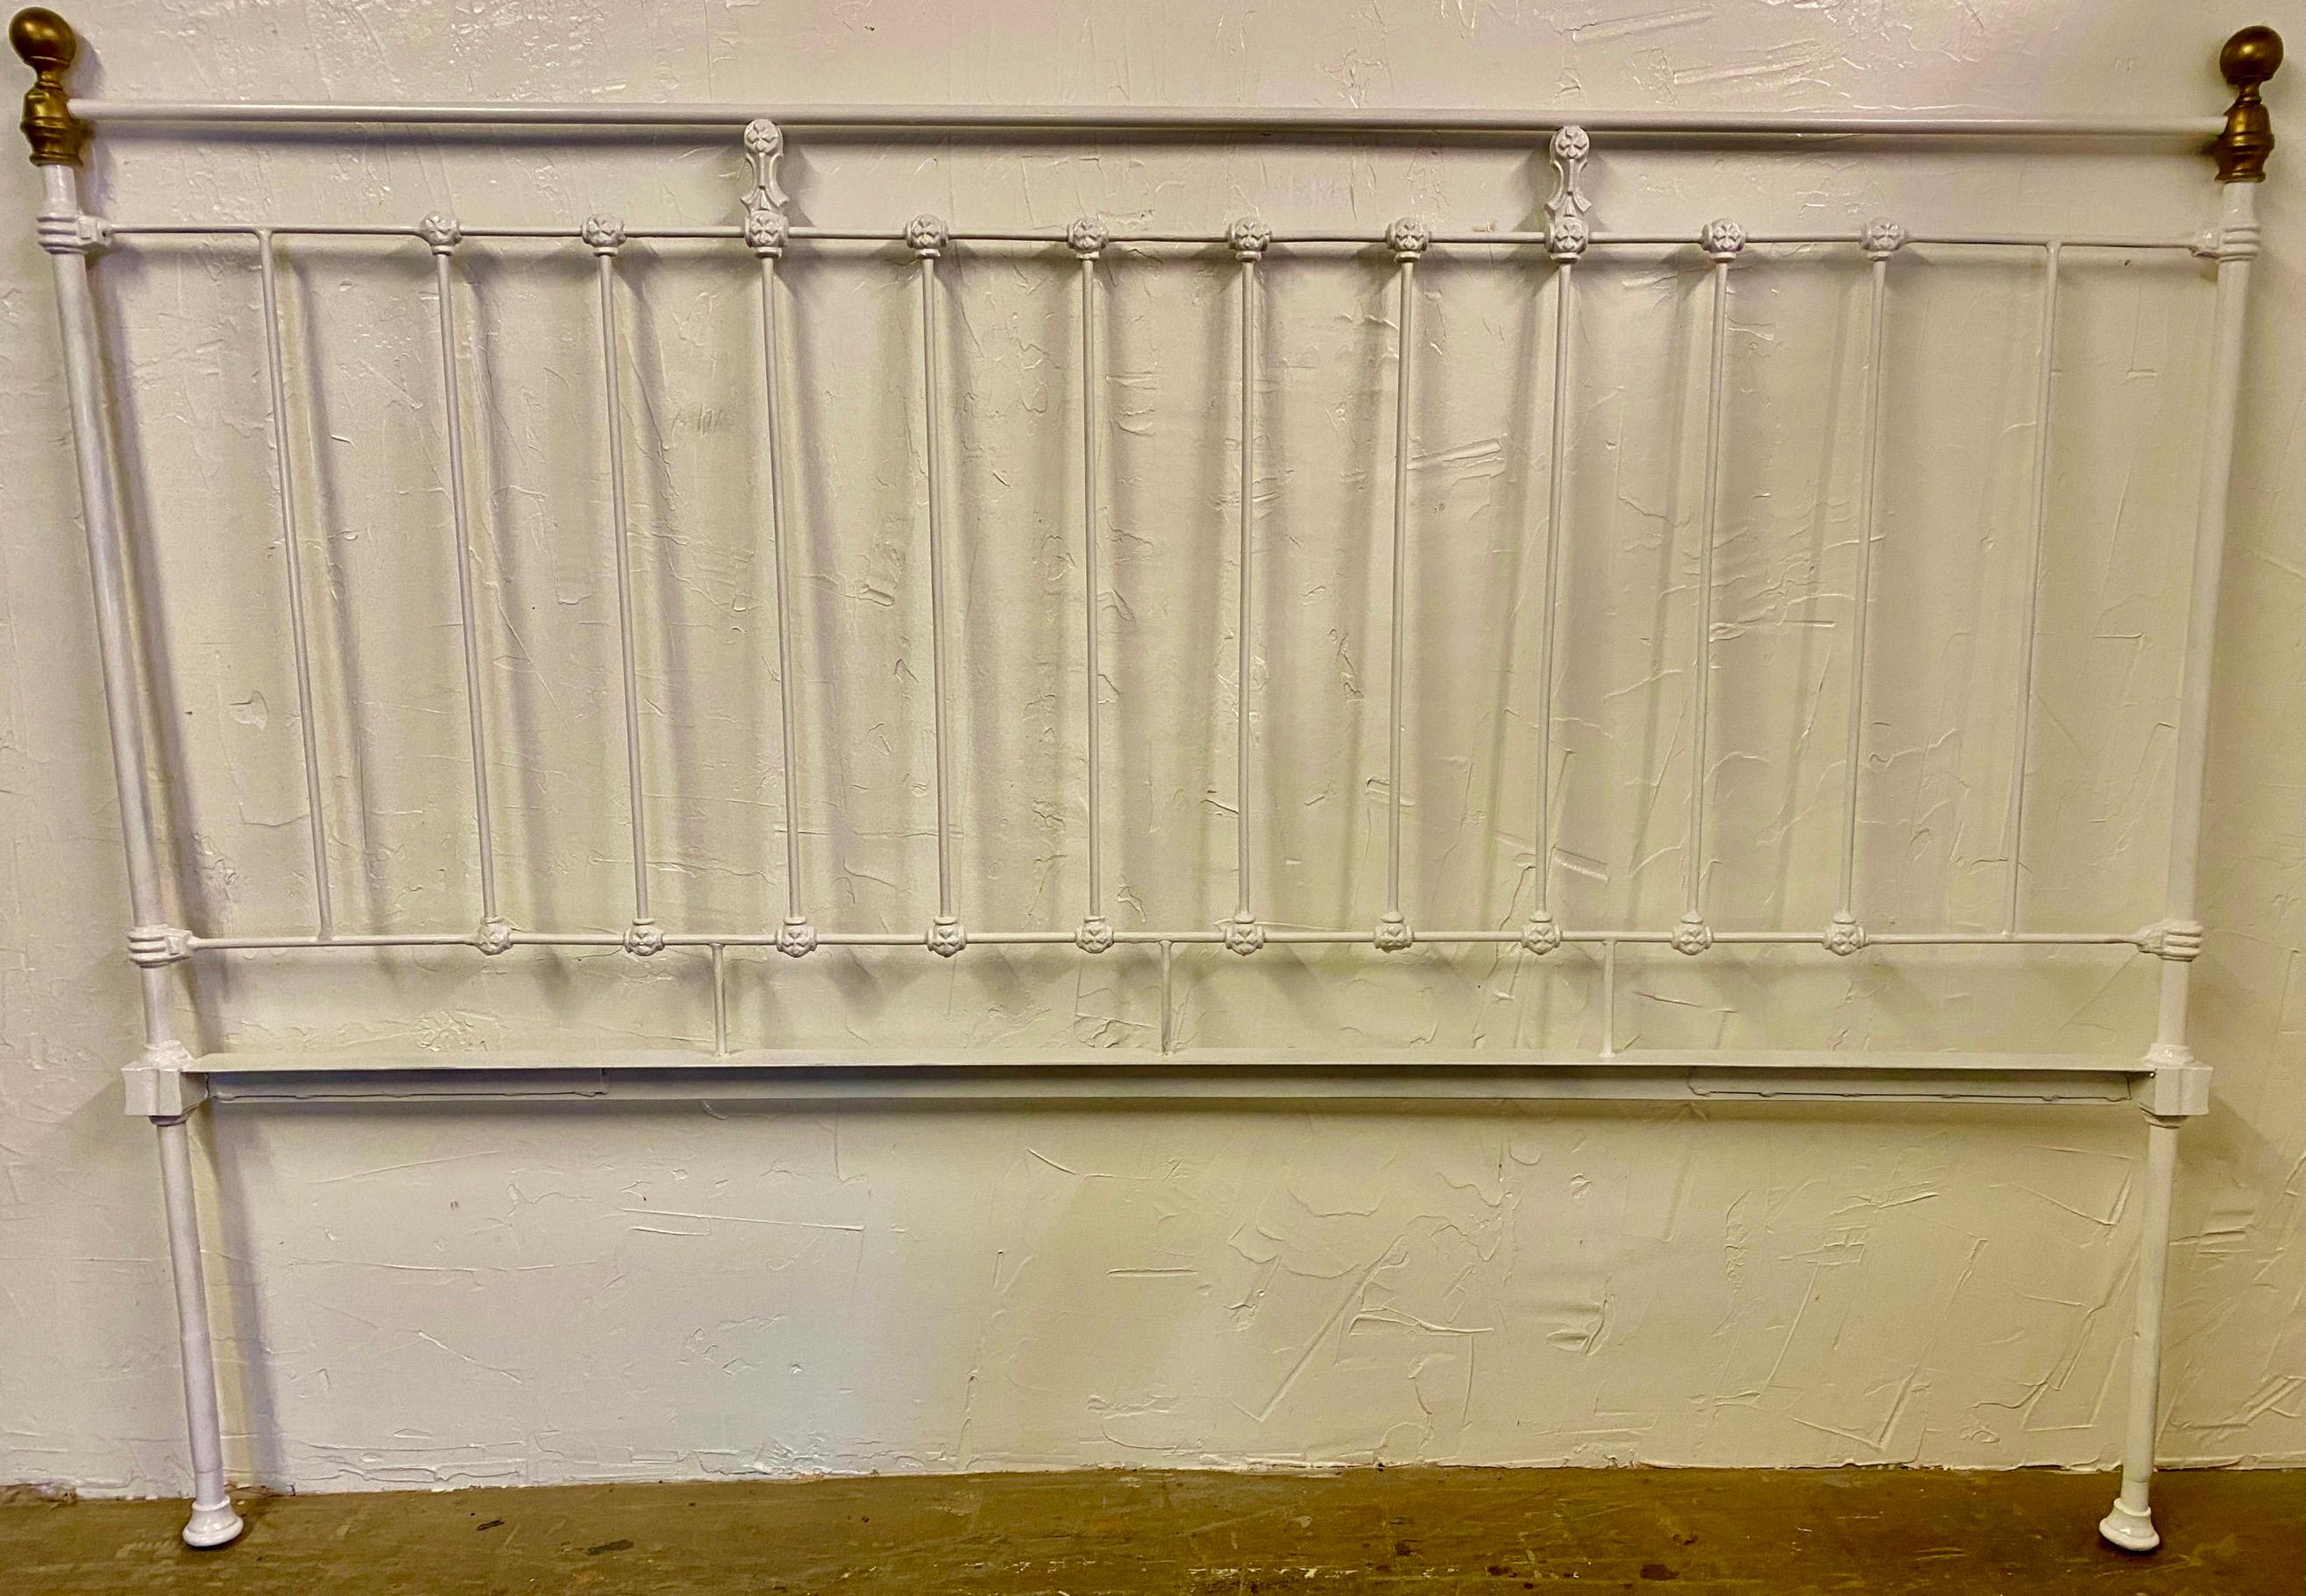 Antique country Victorian style white painted cast iron king size metal headboard with brass finials. Wonderful Classic simple style that will lend itself to modern, classical, neoclassical, Swedish Gustavian or French country decor. 
Search term: